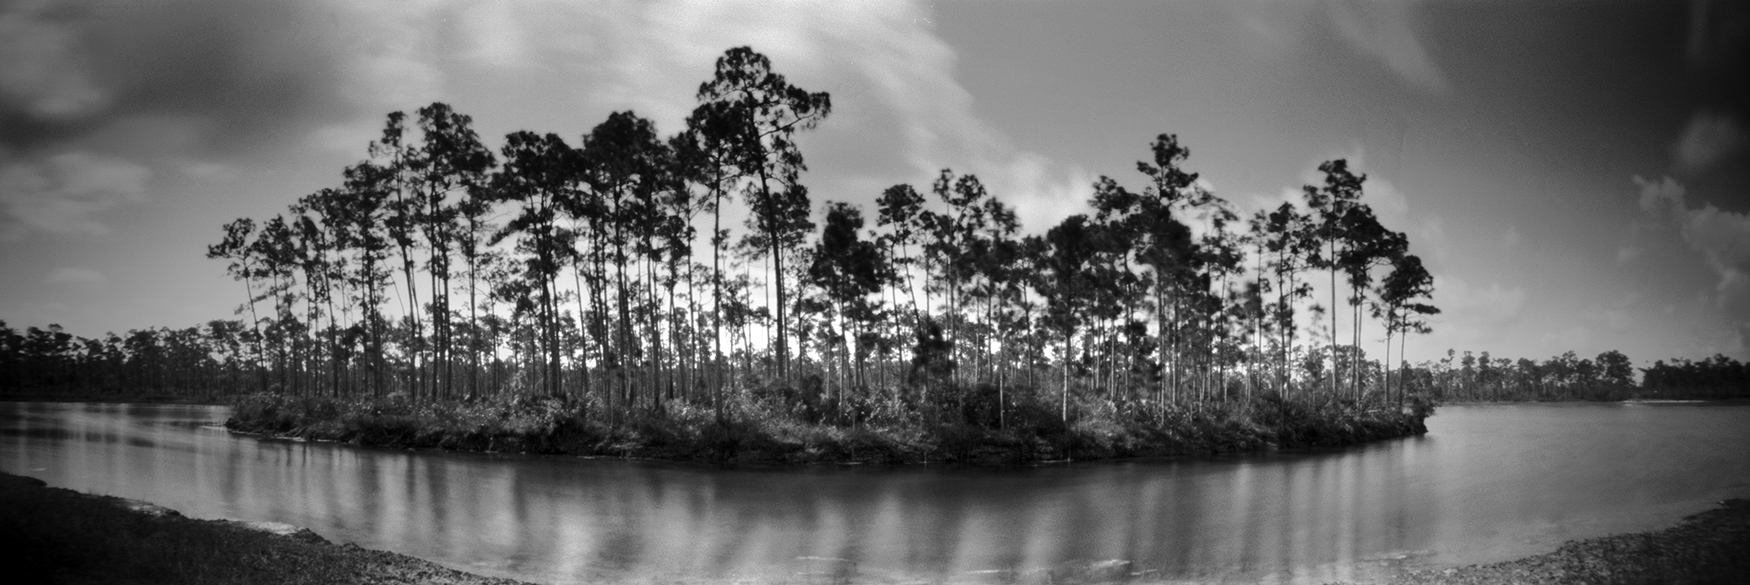 Pine trees on Long Pine Key In the Everglades National Park, Florida. Captured on film with a pinhole camera